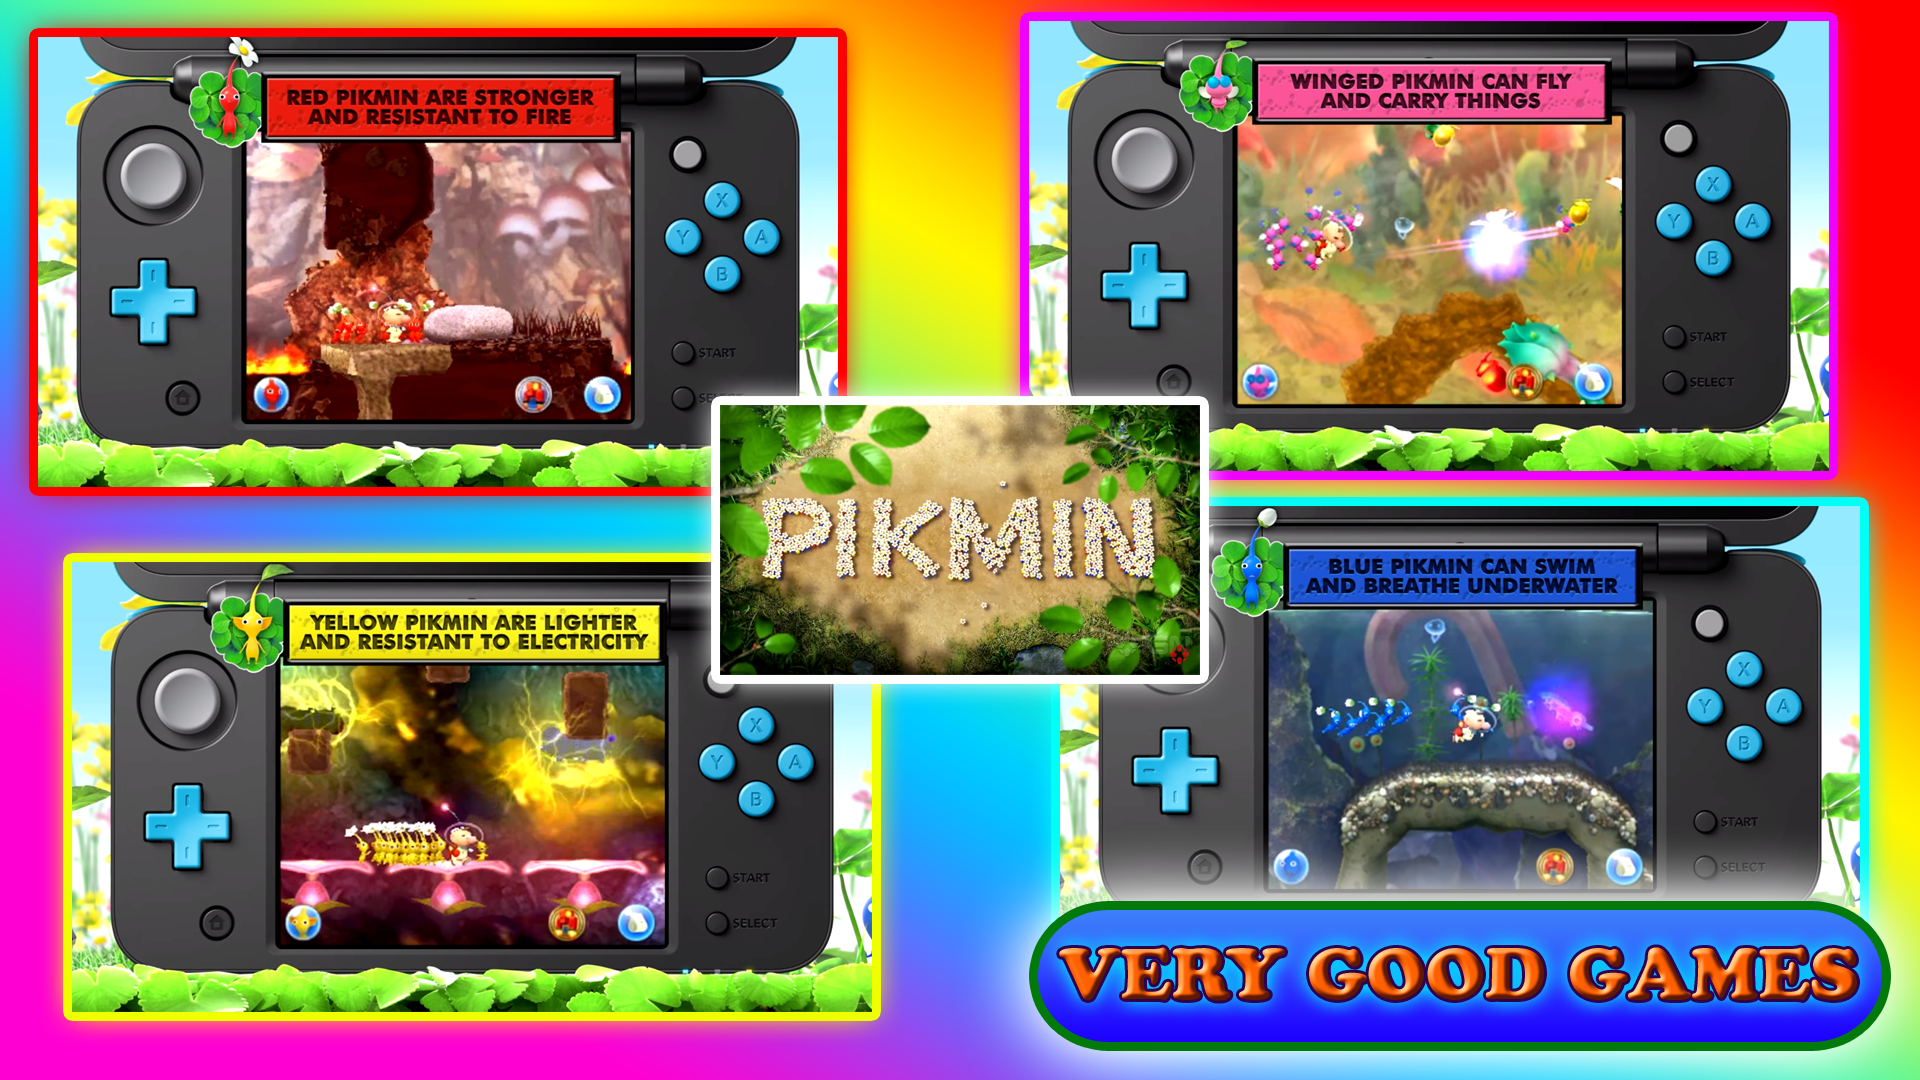 A banner with screenshots from the Hey! Pikmin game and descriptions of Pikmin's abilities